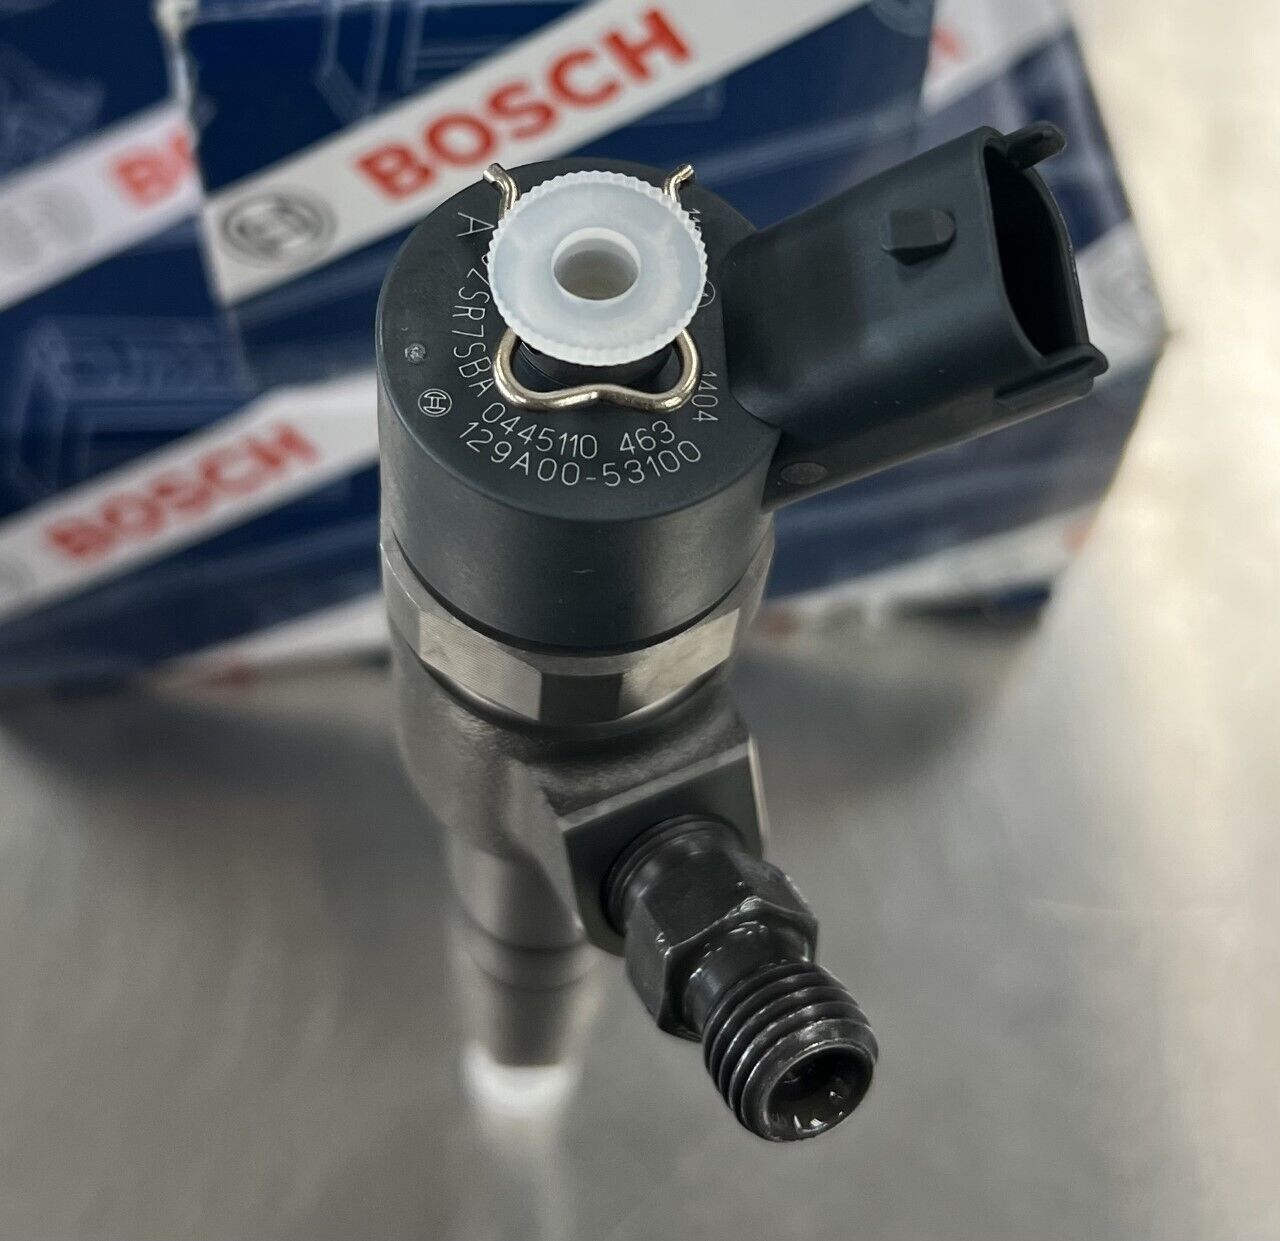 BRAND NEW GENUINE BOSCH FUEL INJECTOR For YANMAR ENGINE 129A00-53100  0445110463